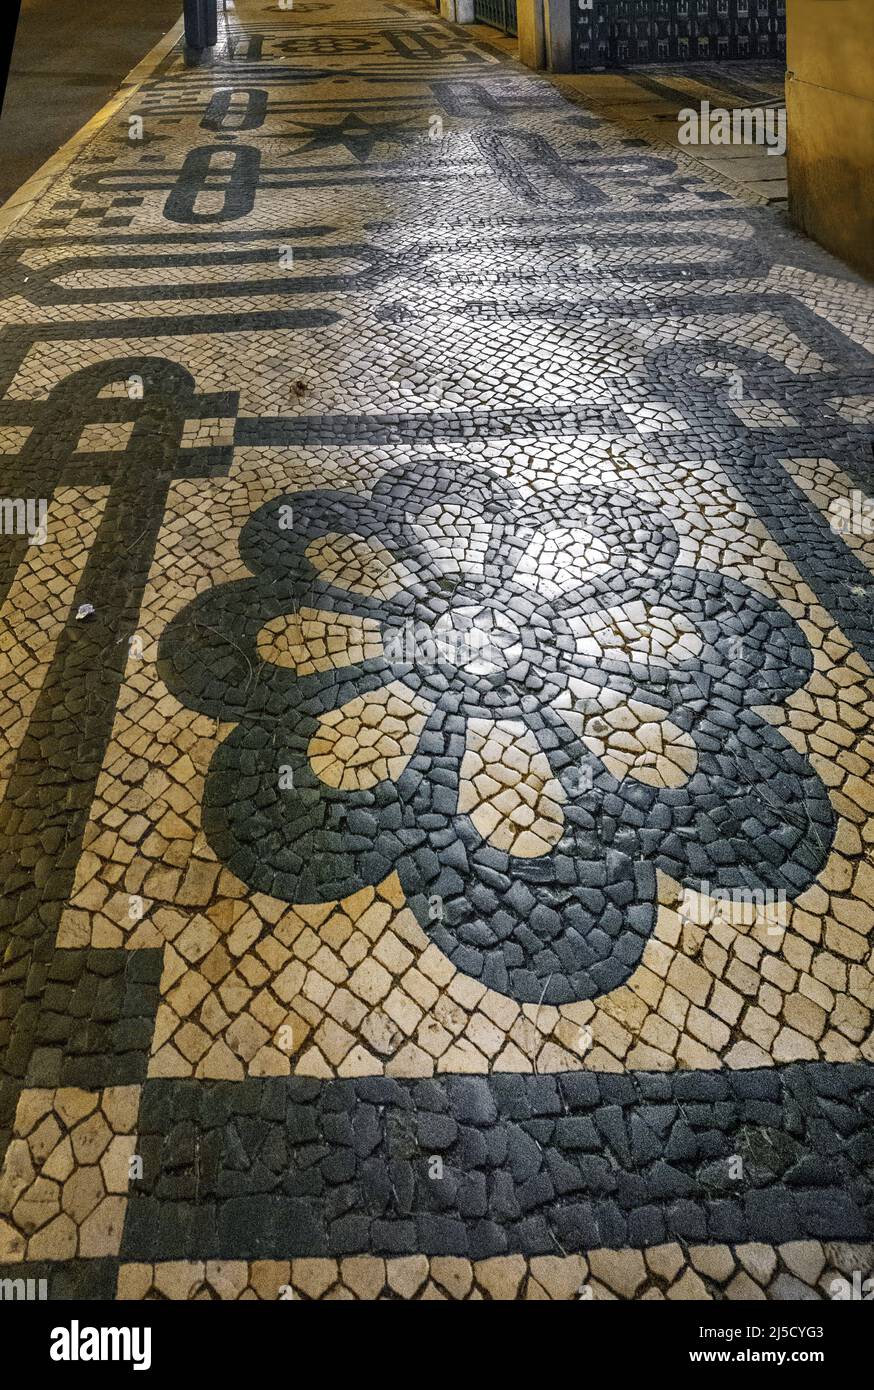 Portugal, Lisbon, 29.07.2020. Portuguese paving stones in Lisbon on 29.07.2020. Portuguese paving is a traditional paving used for many pedestrian areas in Portugal. It consists of small flat stones arranged in a pattern or picture, like a mosaic. [automated translation] Stock Photo